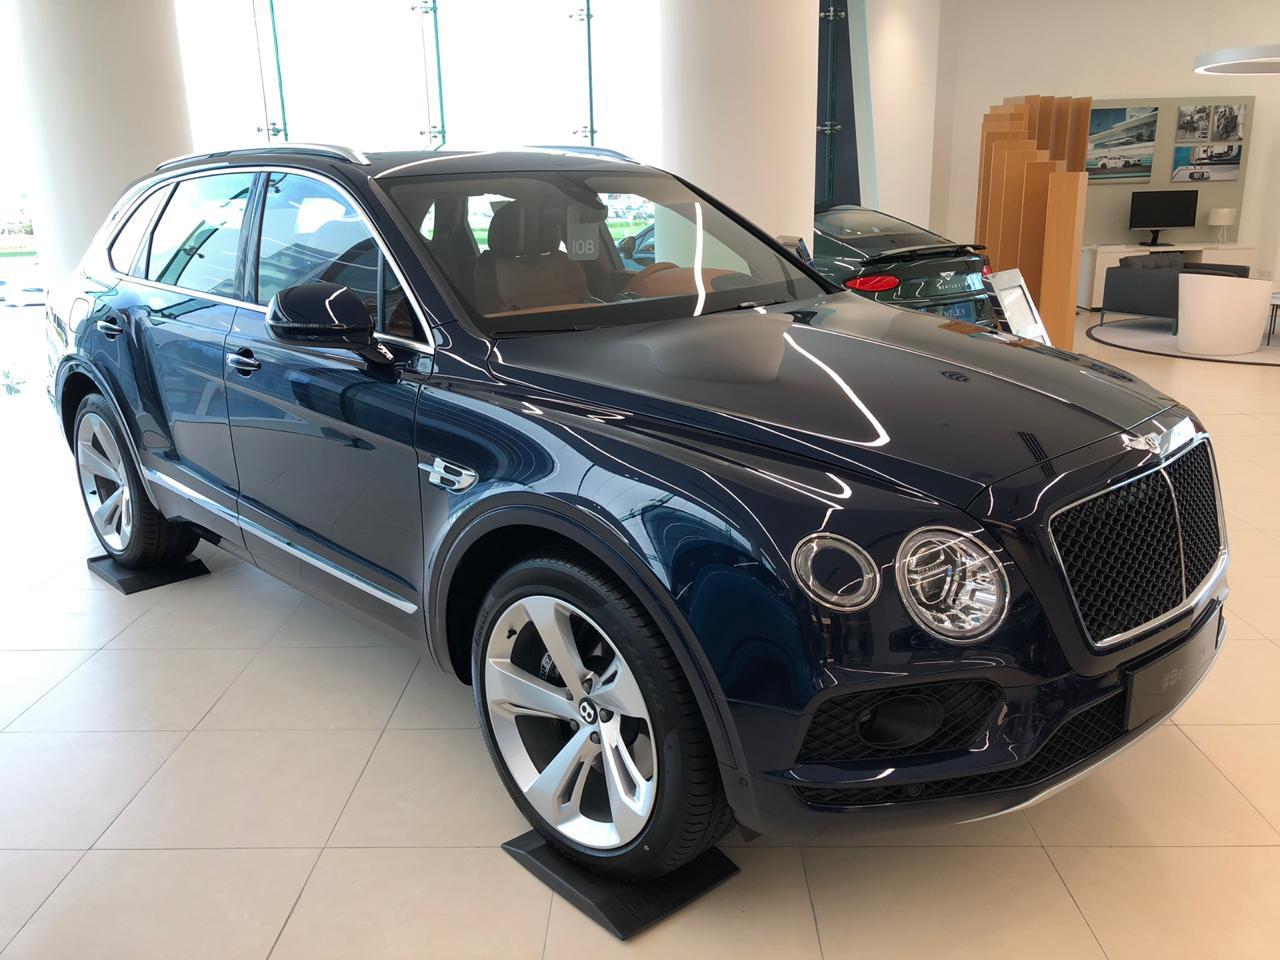 5 Reasons Why The Bentley Bentayga Is The Only Luxury Suv You Need